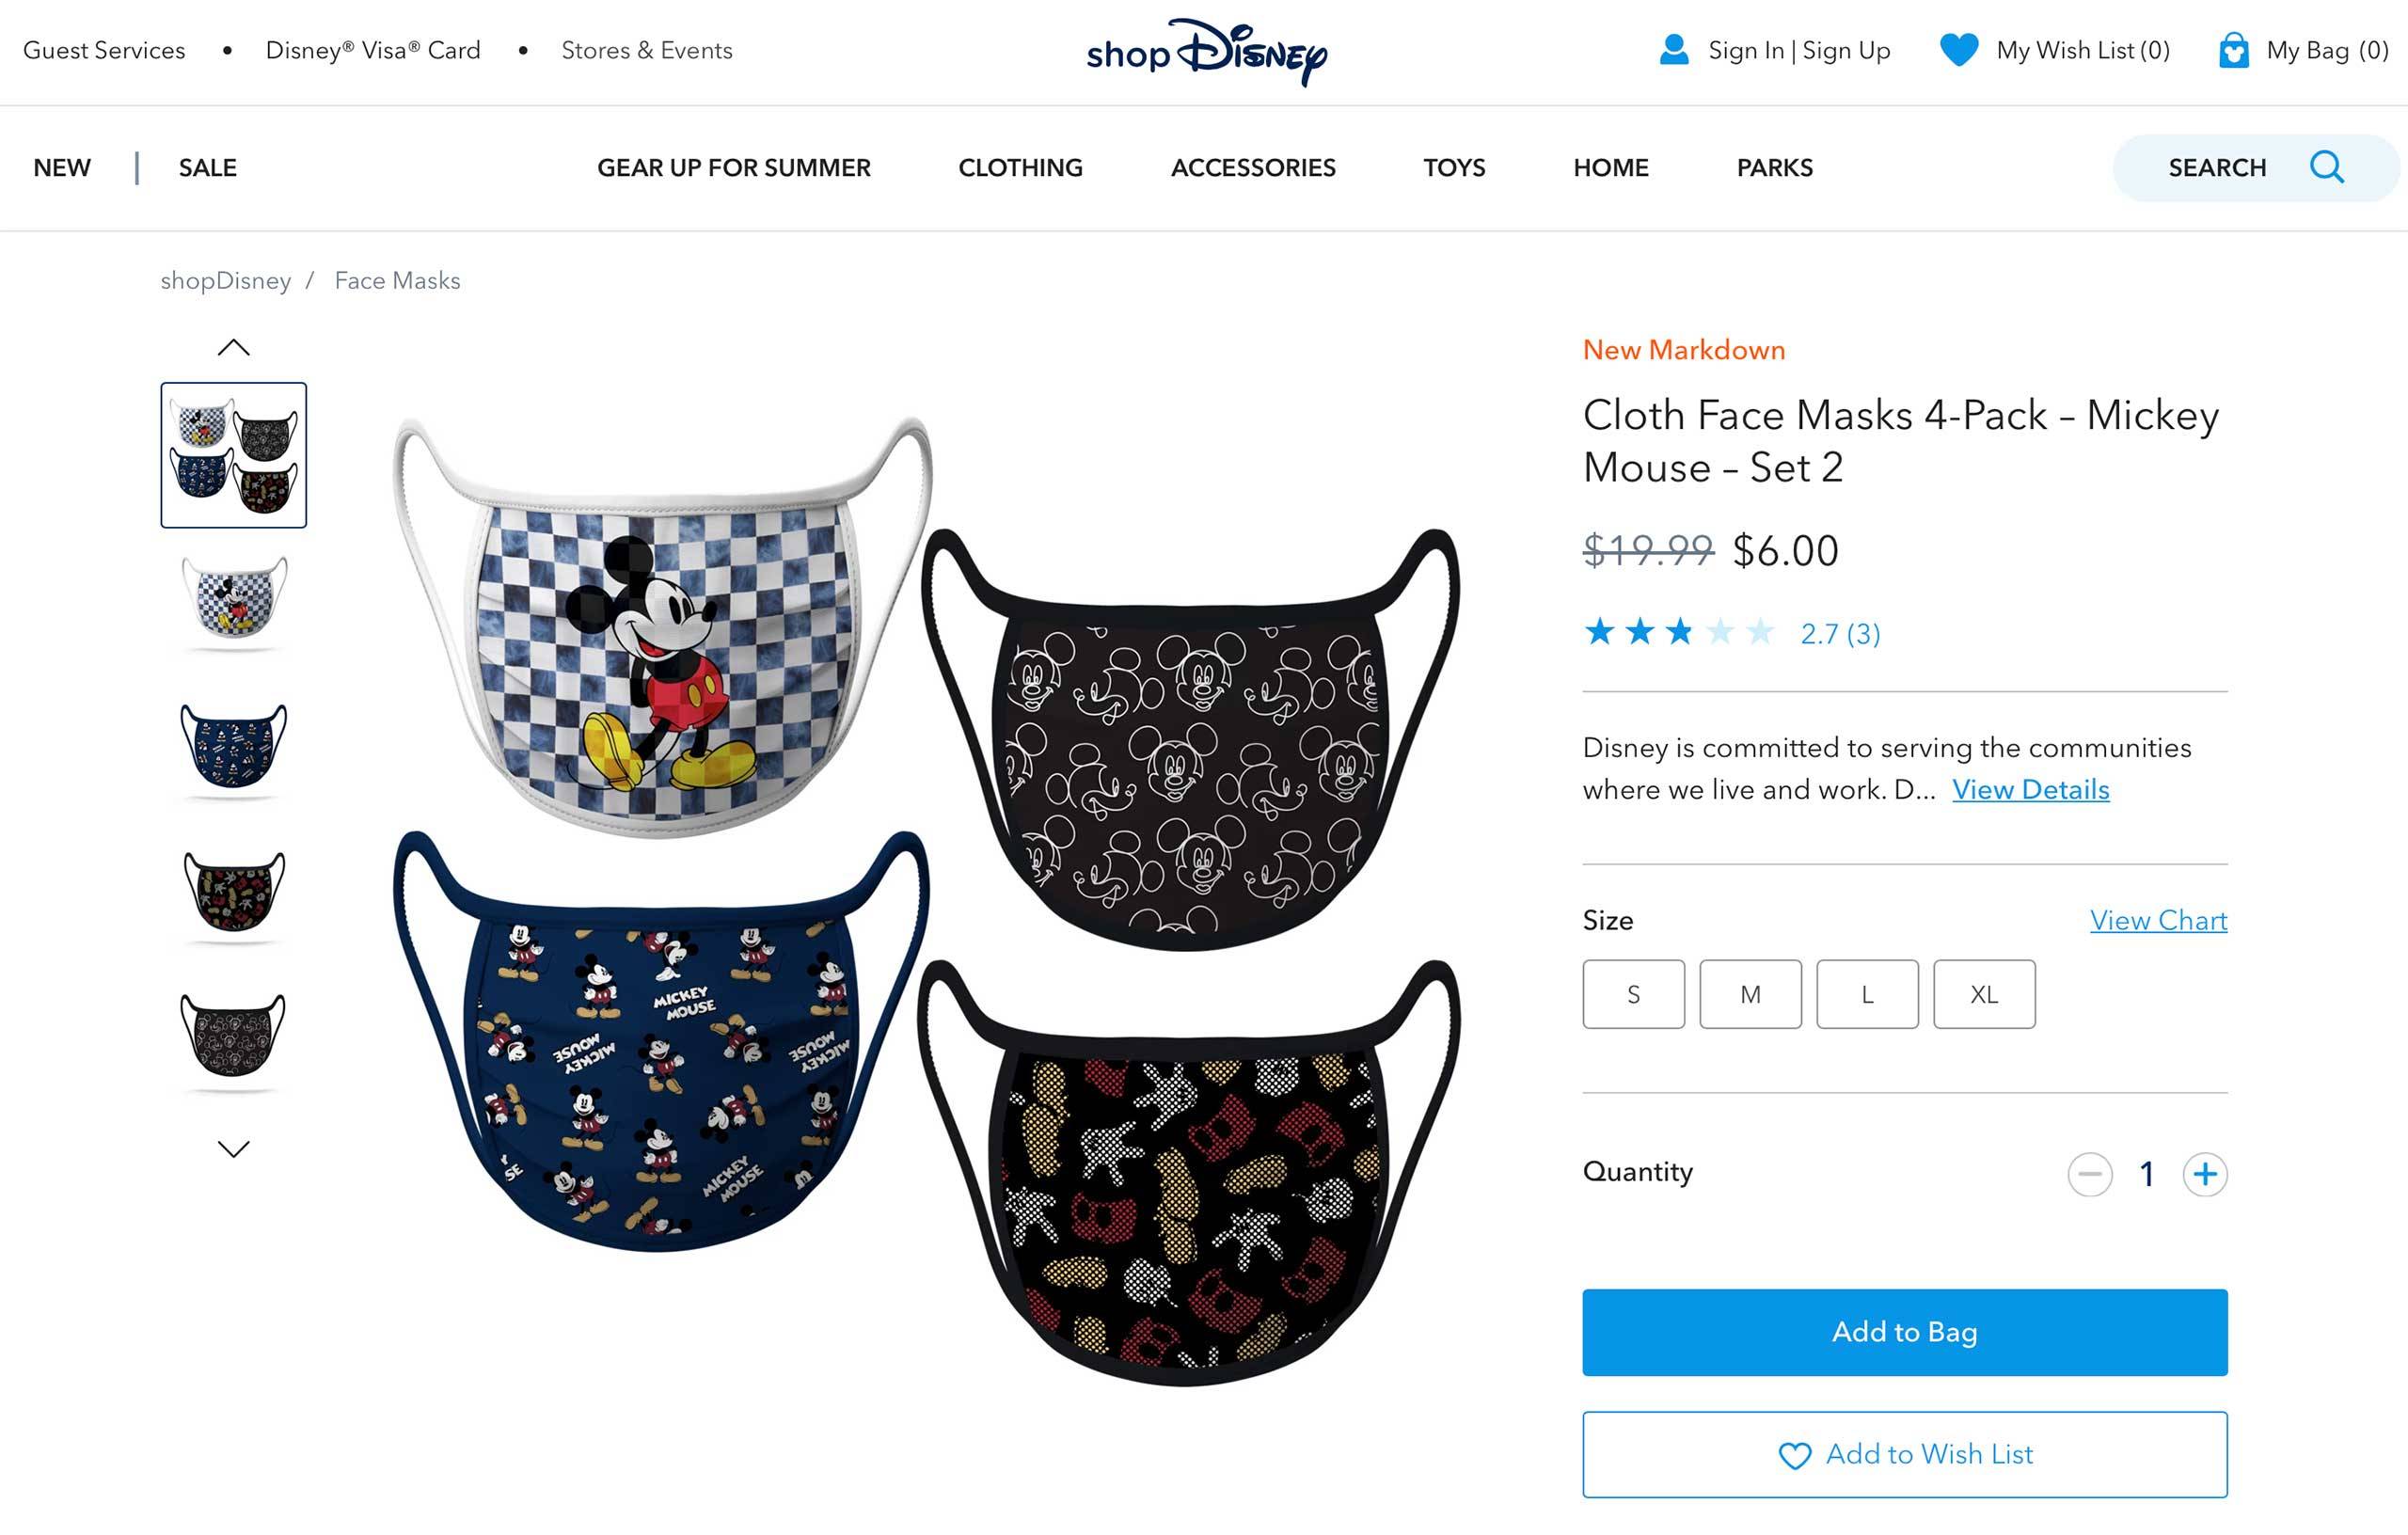 Disney slashes prices of face masks at shopDisney as Disney World's mask requirements near an end